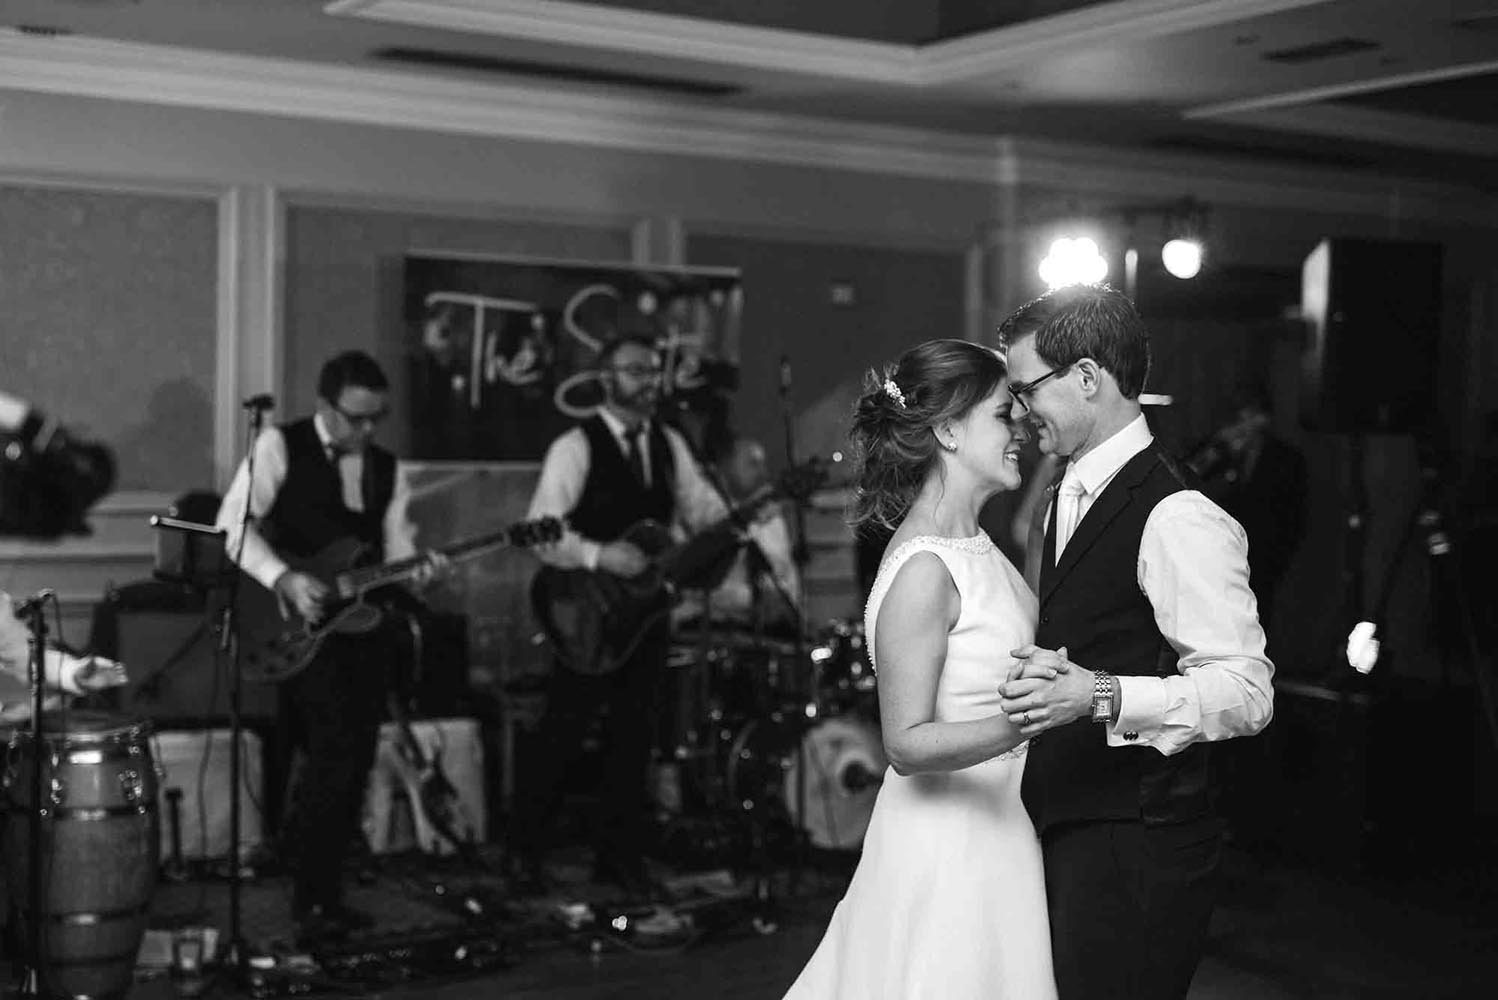 Couple dancing on their wedding day